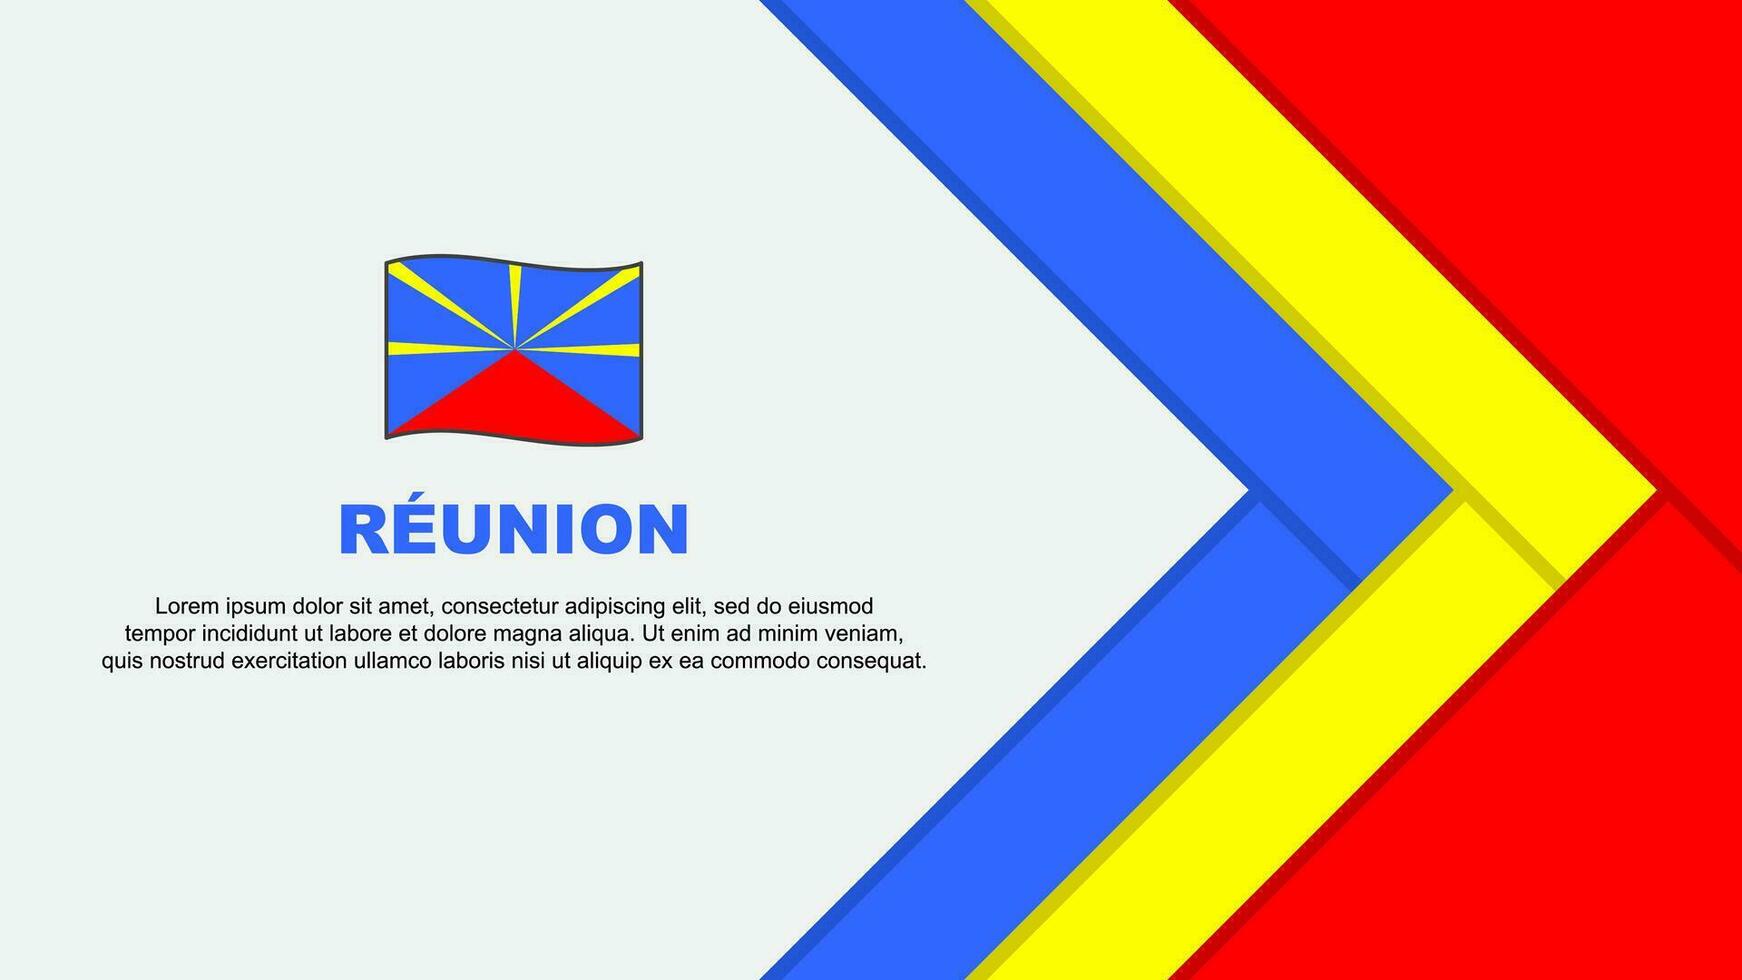 Reunion Flag Abstract Background Design Template. Reunion Independence Day Banner Cartoon Vector Illustration. Cartoon